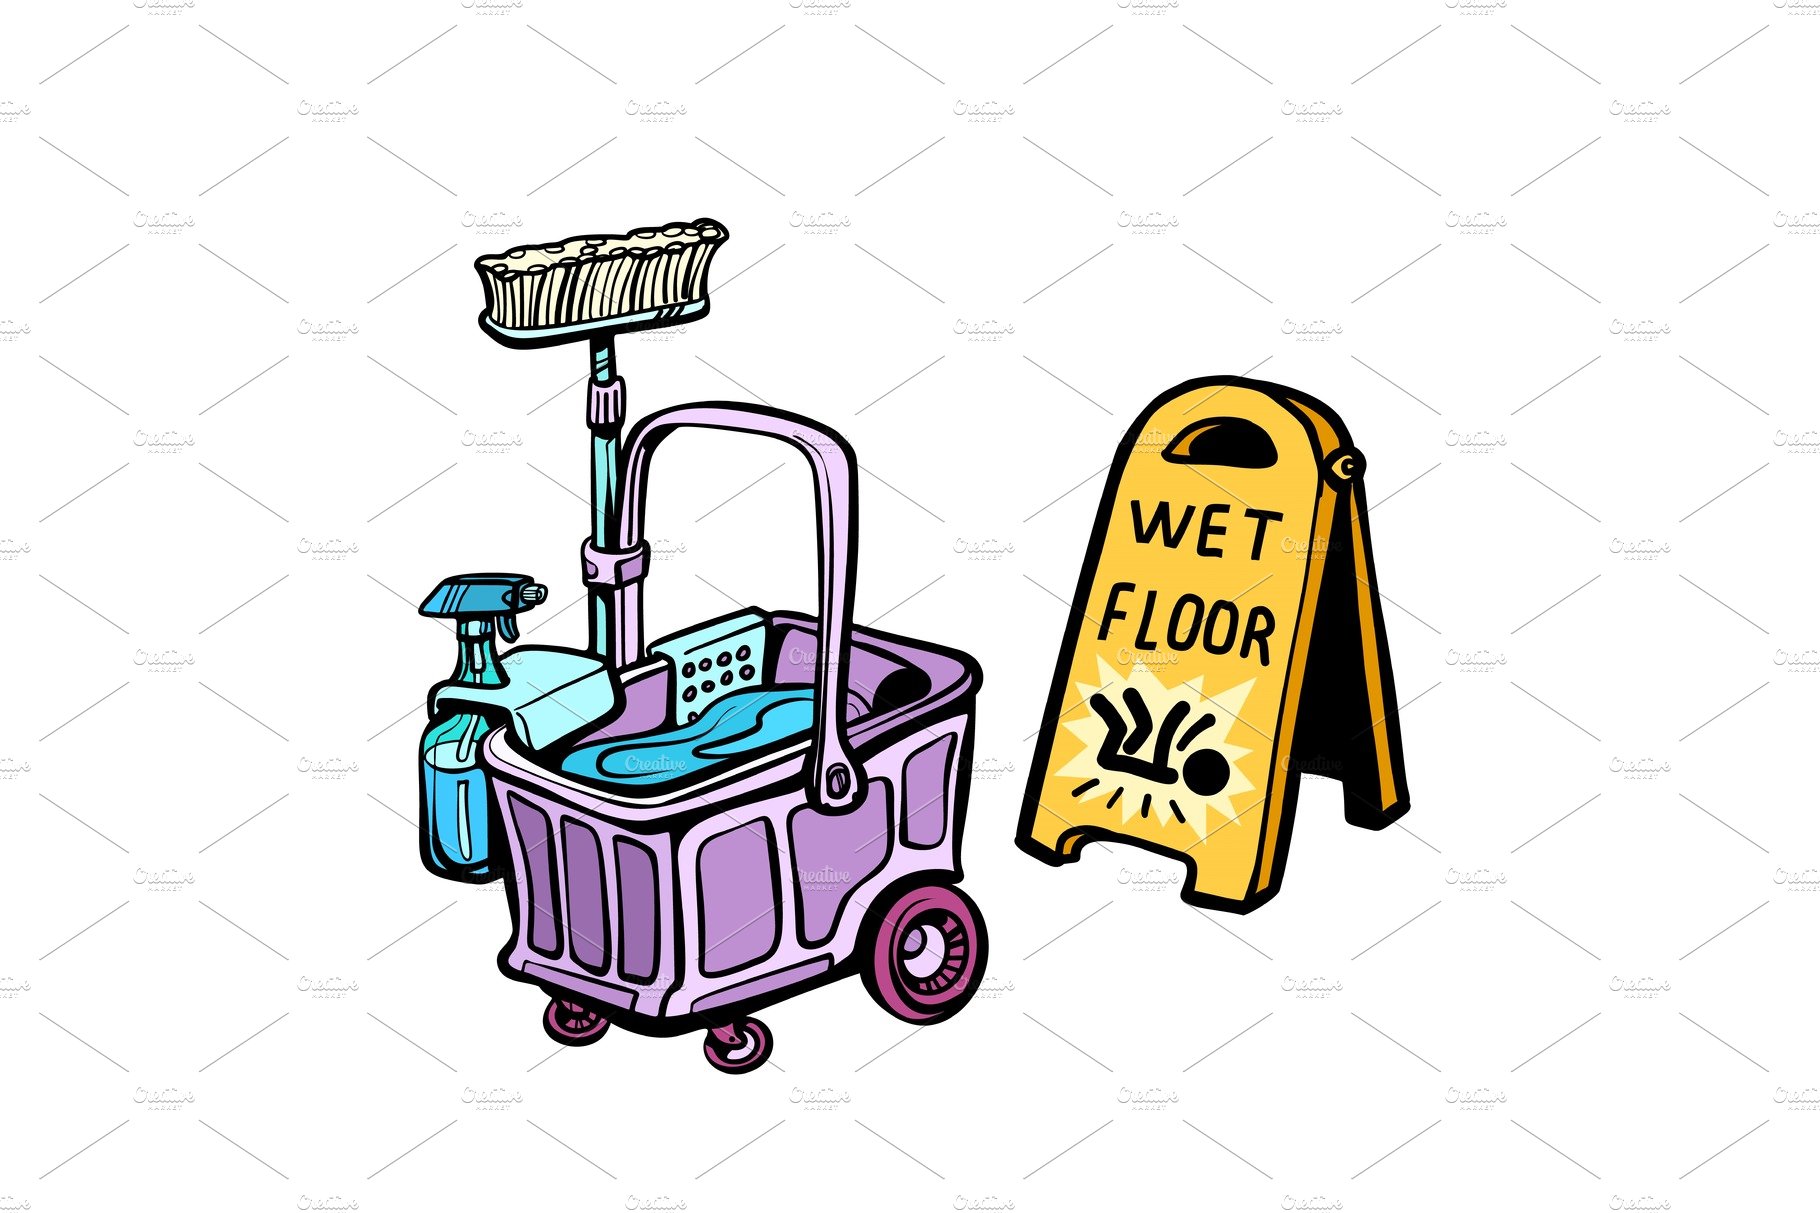 floor washing tools cover image.